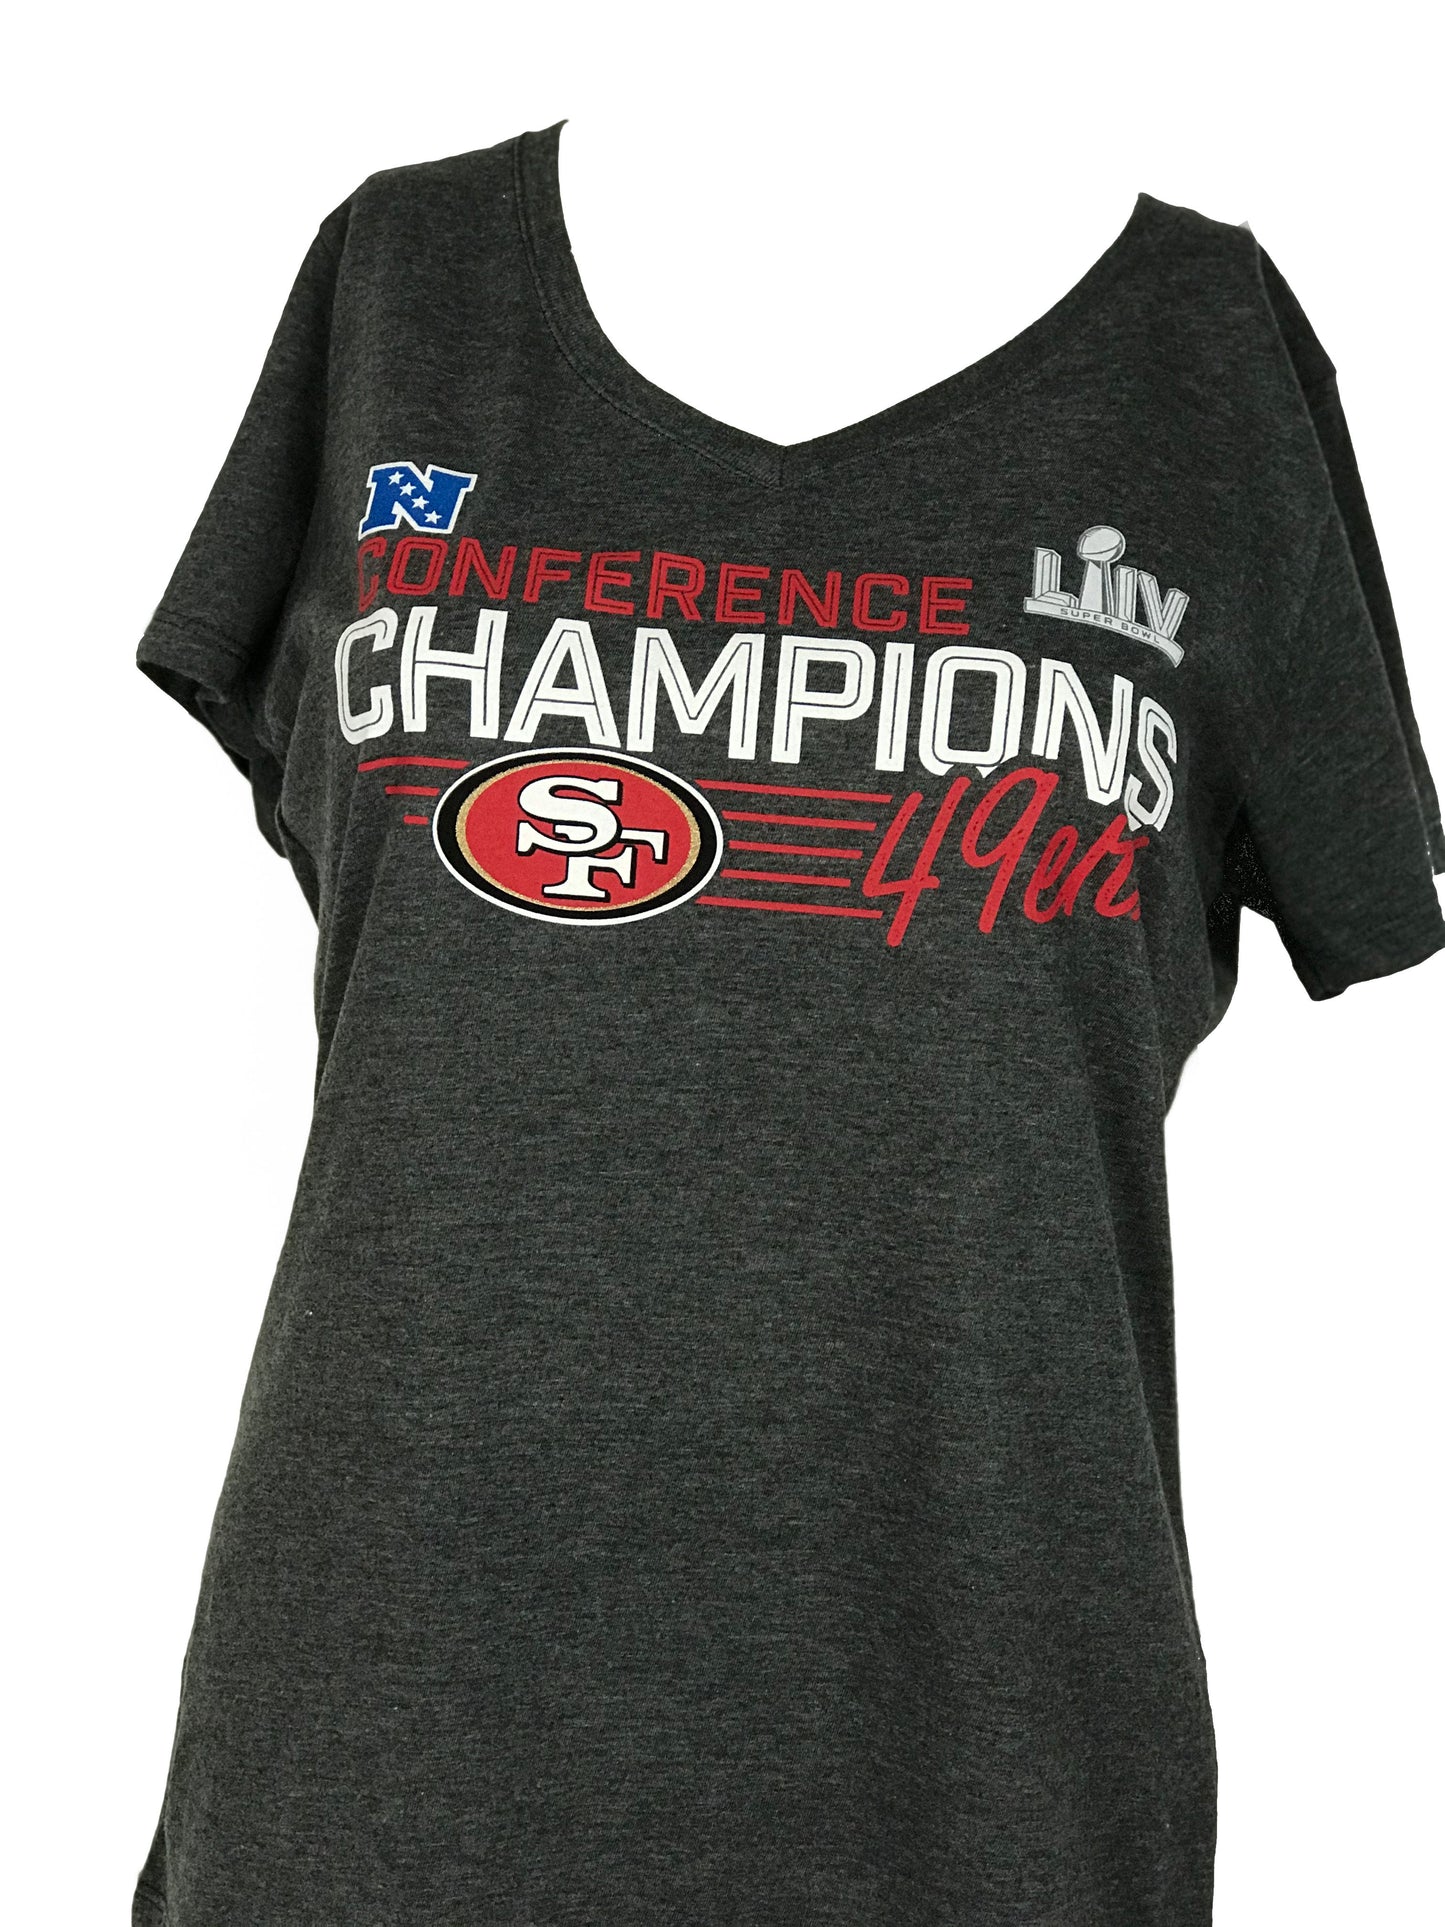 Champions 49ers Vs Rams NFC Conference Championship NFL Unisex T